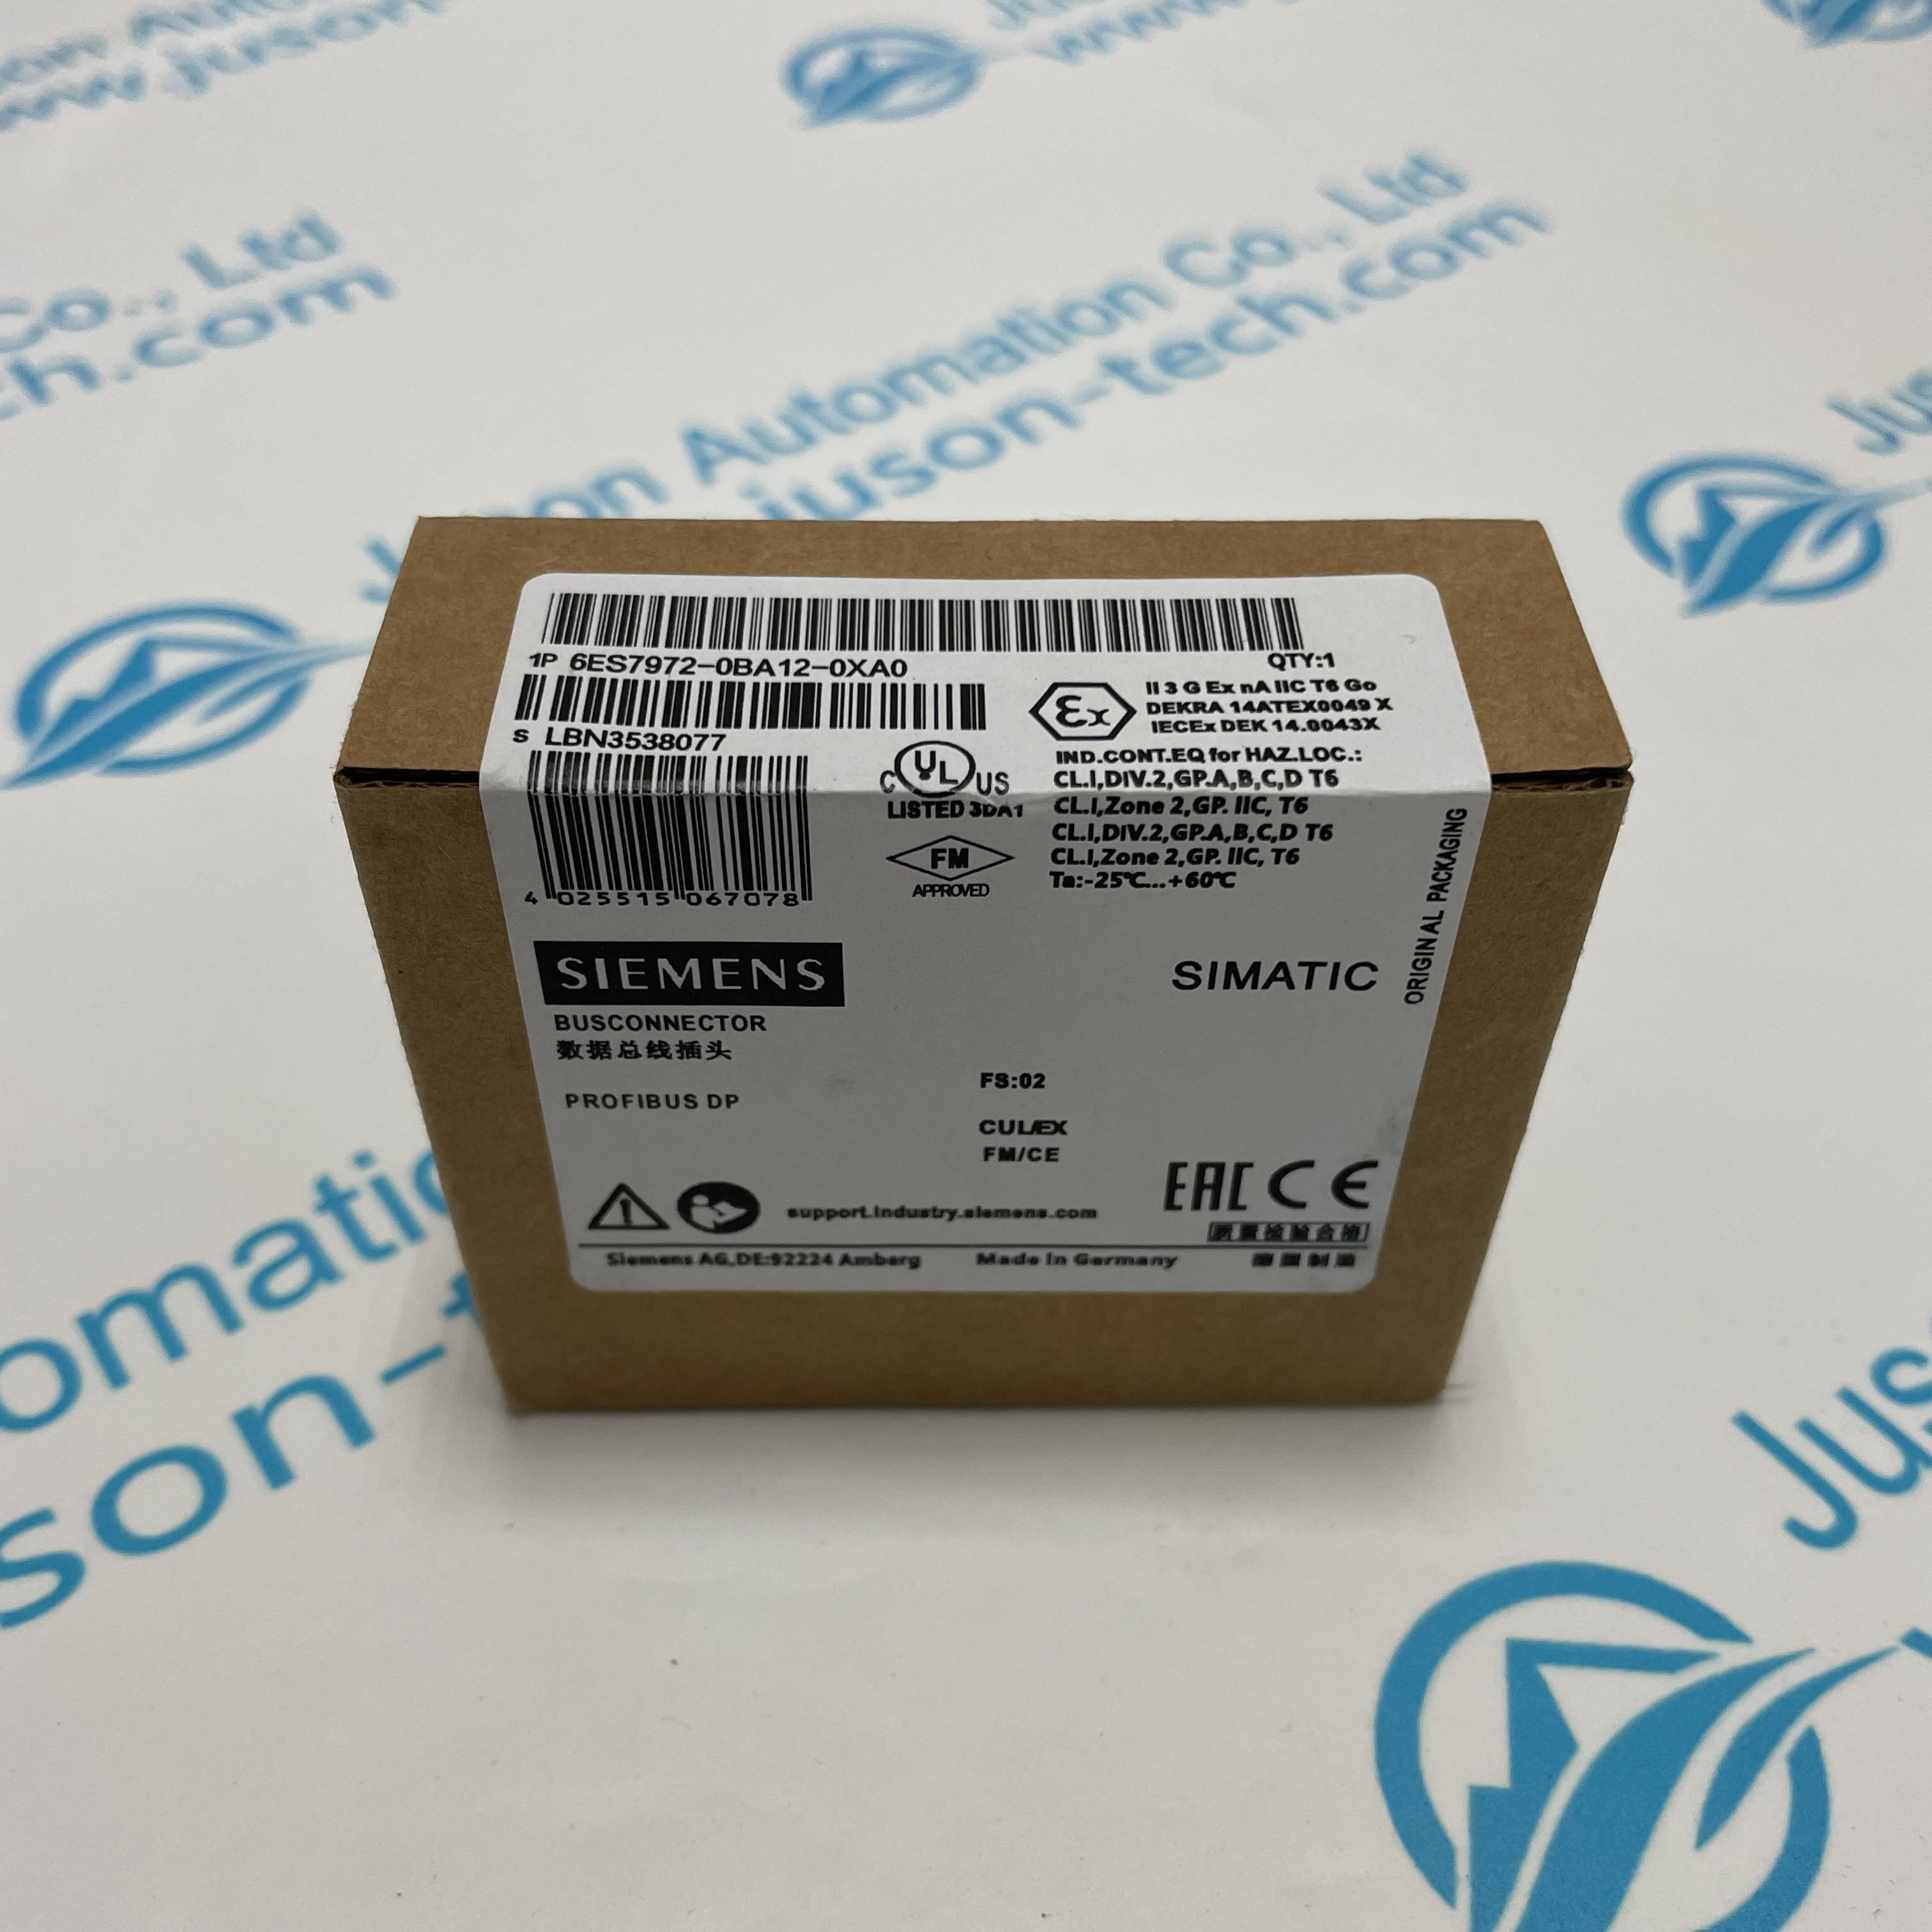 SIEMENS bus connector 6ES7972-0BA12-0XA0 SIMATIC DP, Connection plug for PROFIBUS up to 12 Mbit/s 90° cable outlet, 15.8x 64x 35.6 mm (WxHxD)